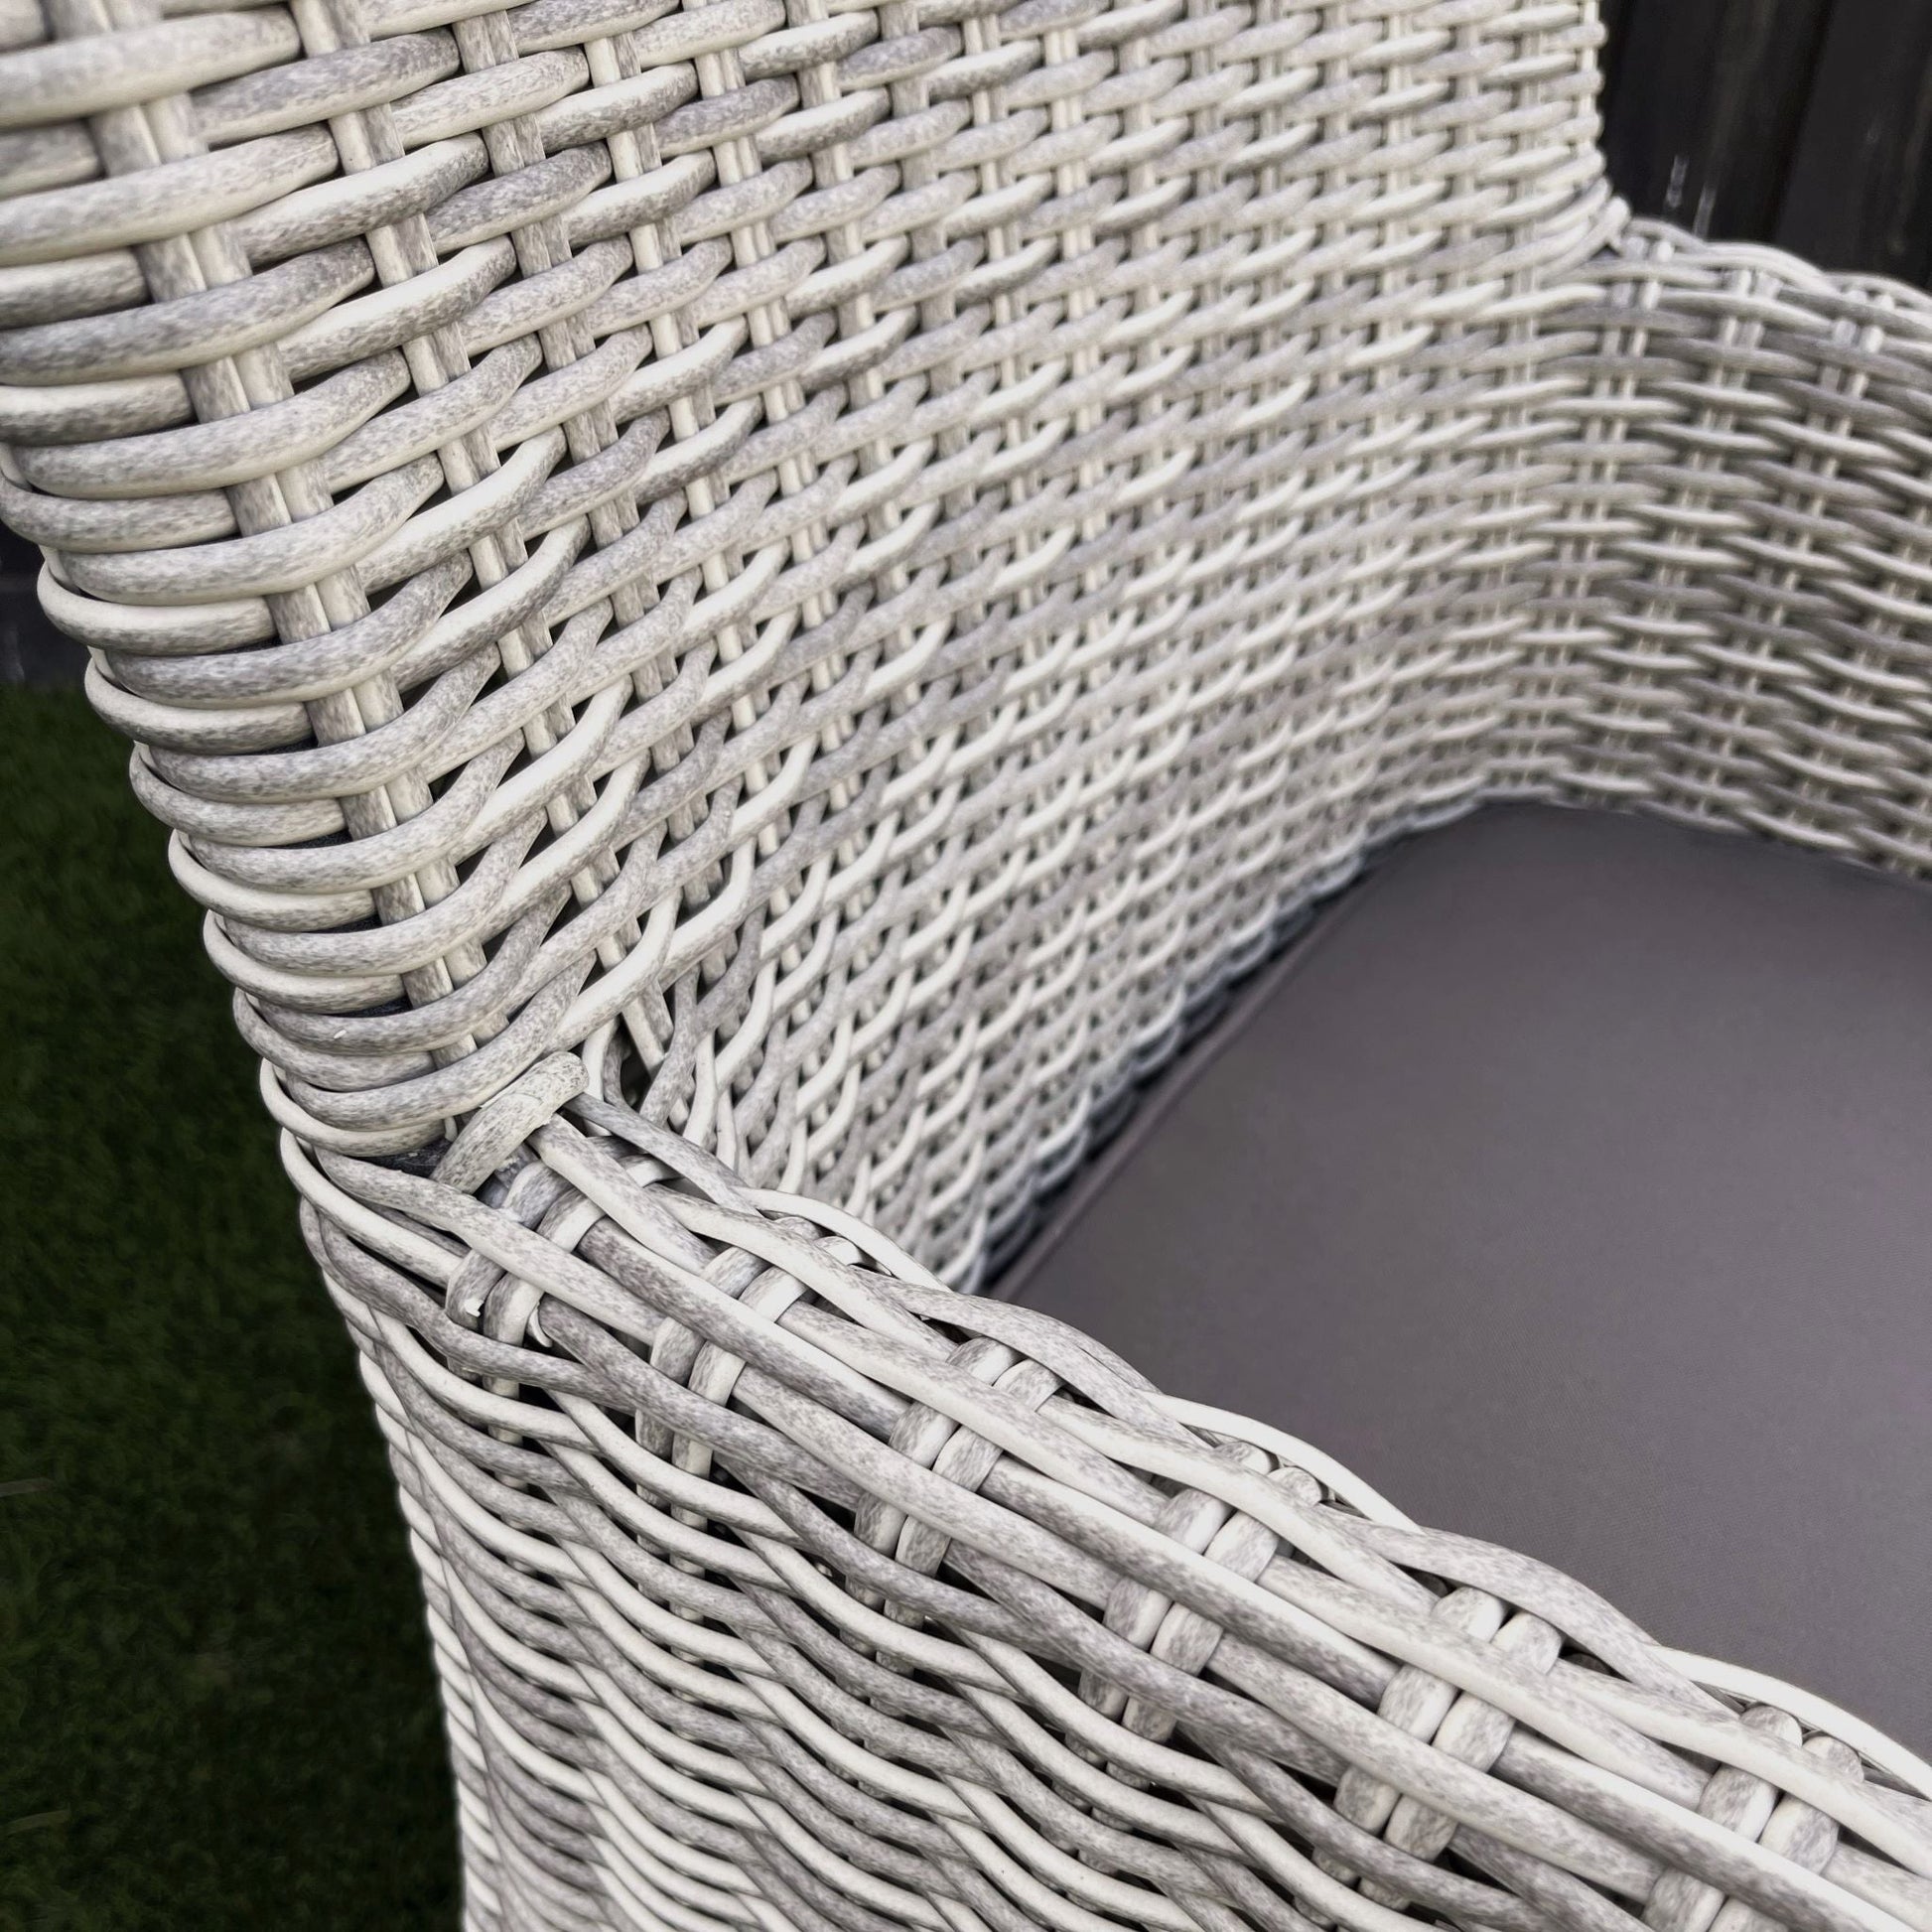 ETO Poly Rattan Wicker Outdoor Dining Chair - Grey White - Direct Factory Furniture Australia